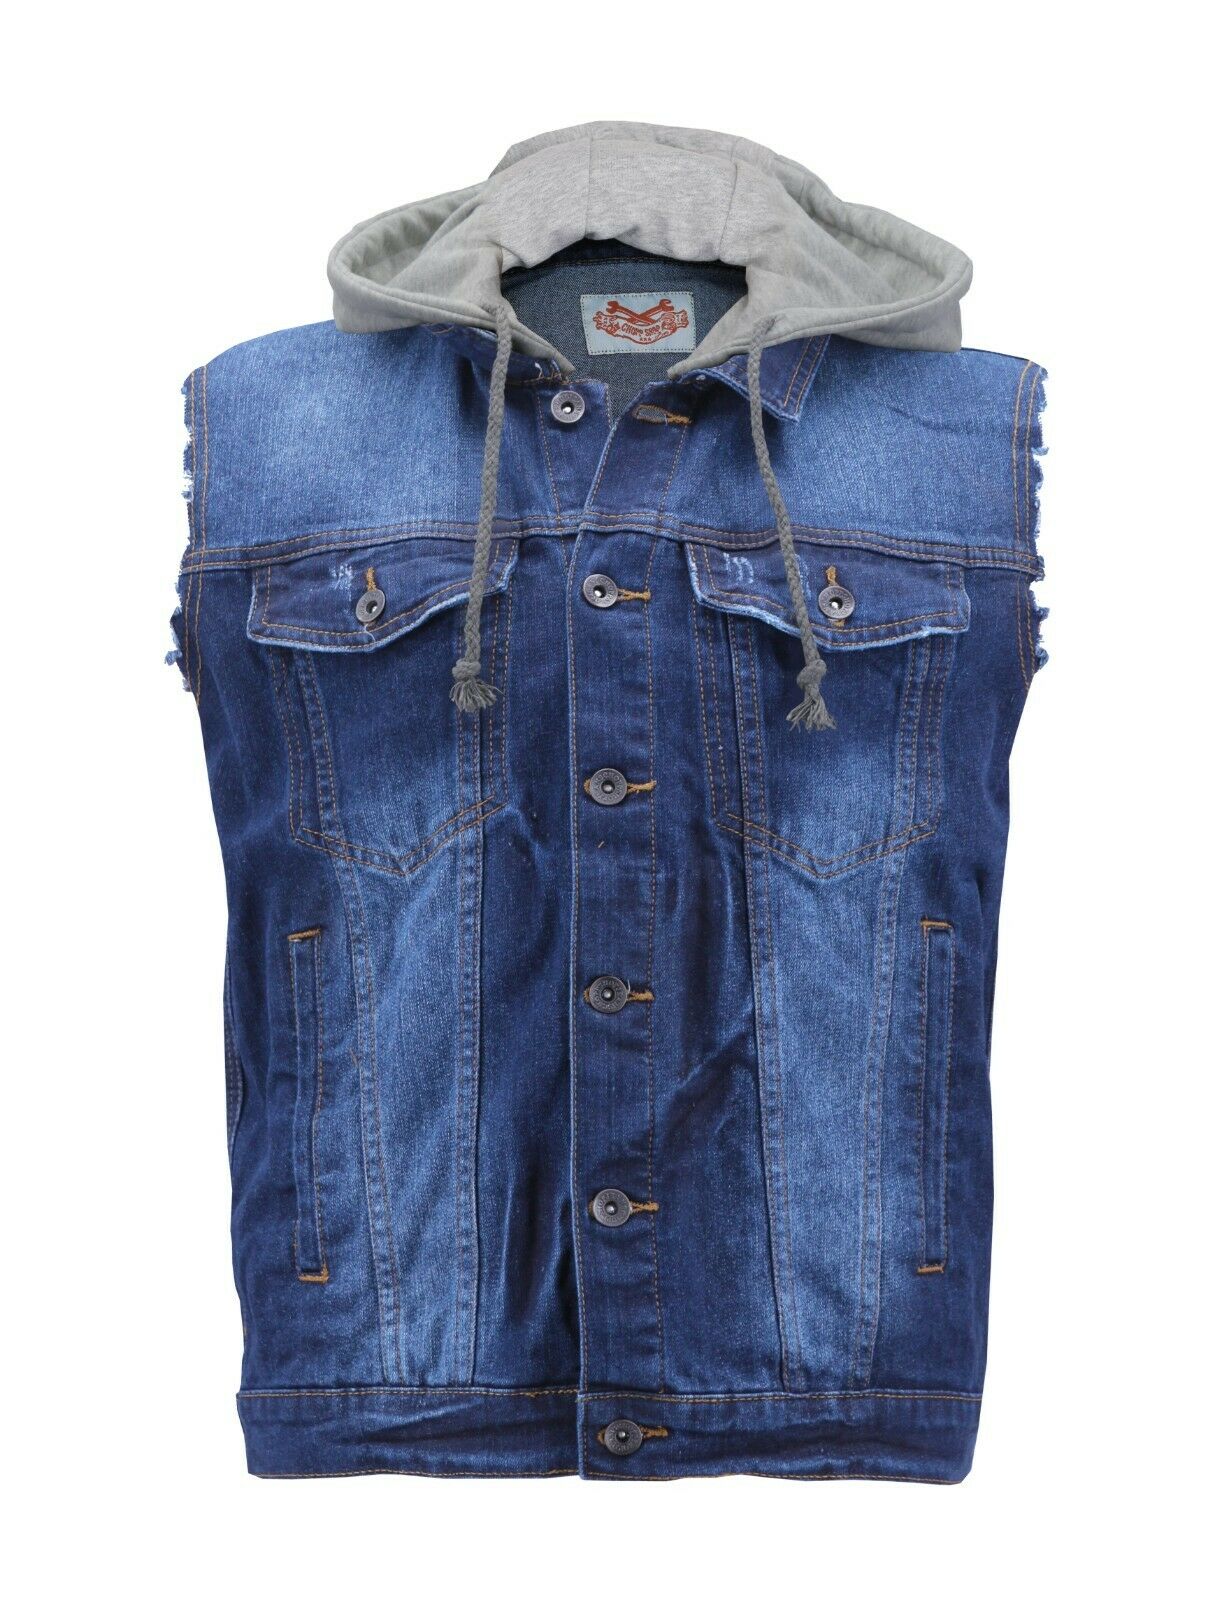 CS Men's Ripped Distressed Button Up Denim Jean Vest With Removable Hood (Dark Blue, 2XL) - image 1 of 1